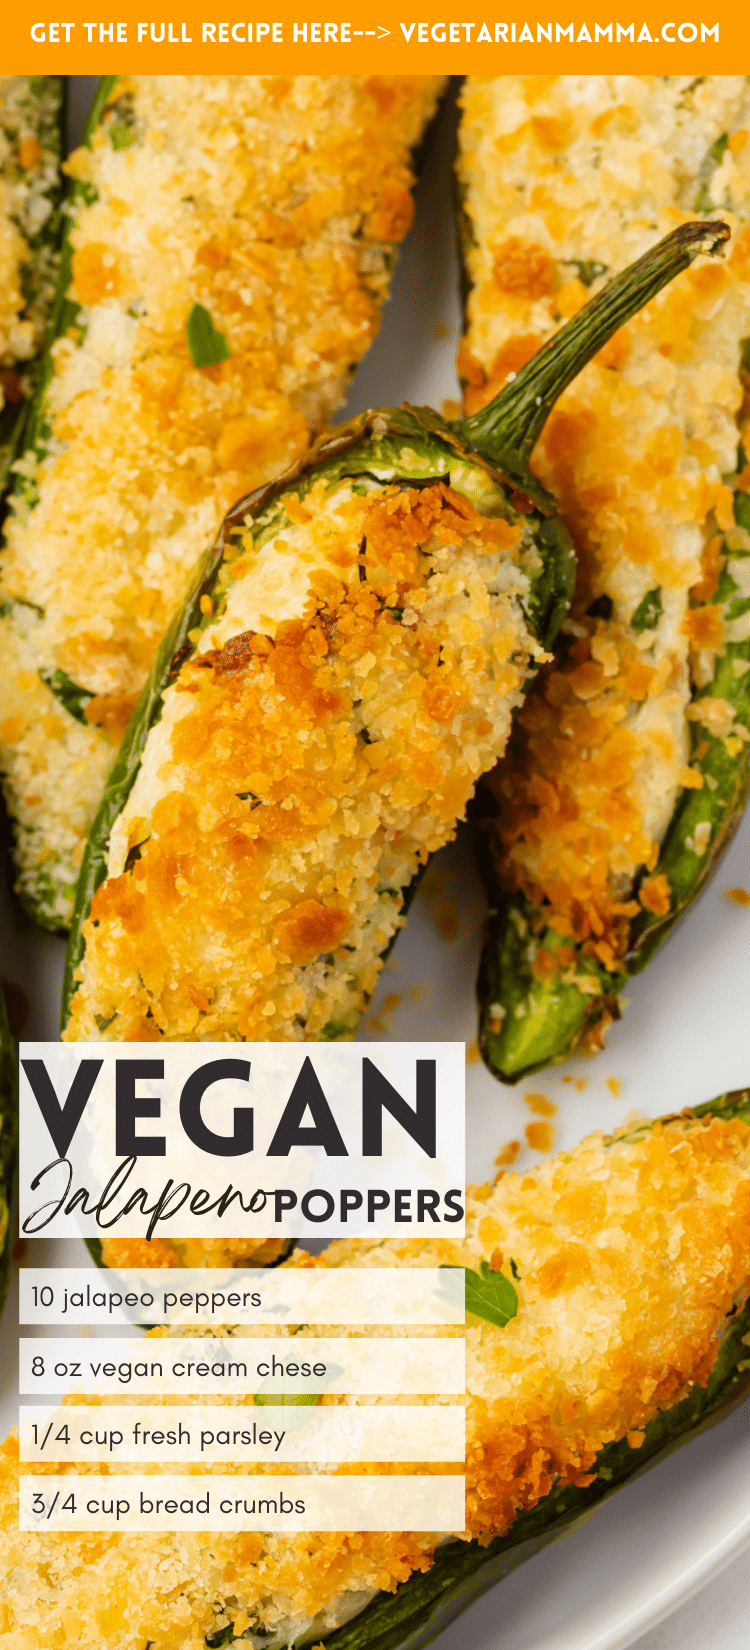 These vegan jalapeno poppers are creamy, crispy, spicy and insanely delicious! This easy appetizer comes together quickly. Air Fryer and Oven directions included!